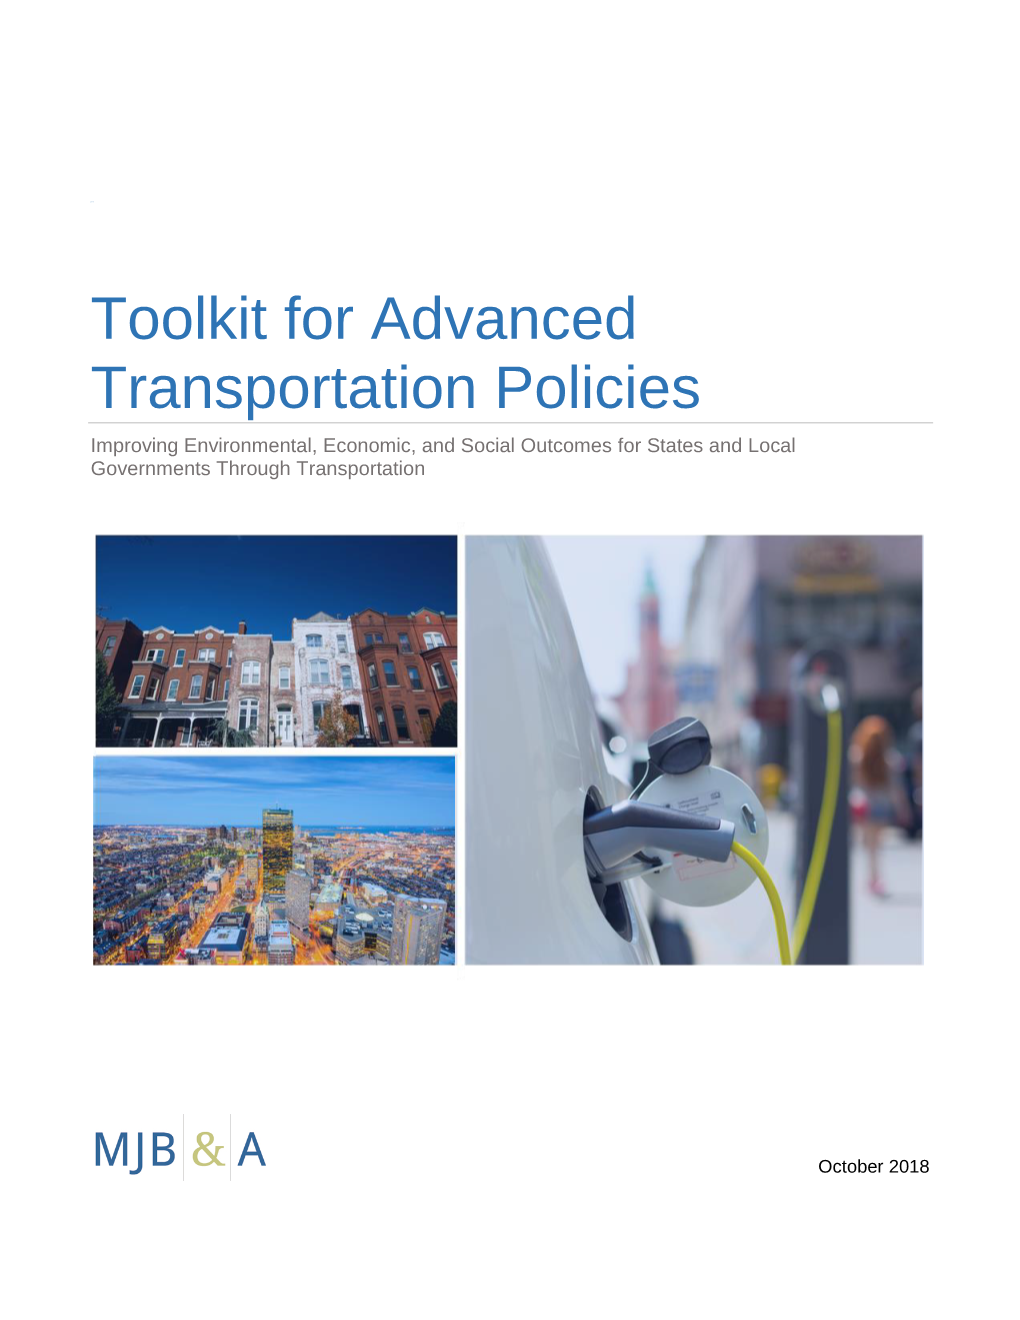 Toolkit for Advanced Transportation Policies Improving Environmental, Economic, and Social Outcomes for States and Local Governments Through Transportation